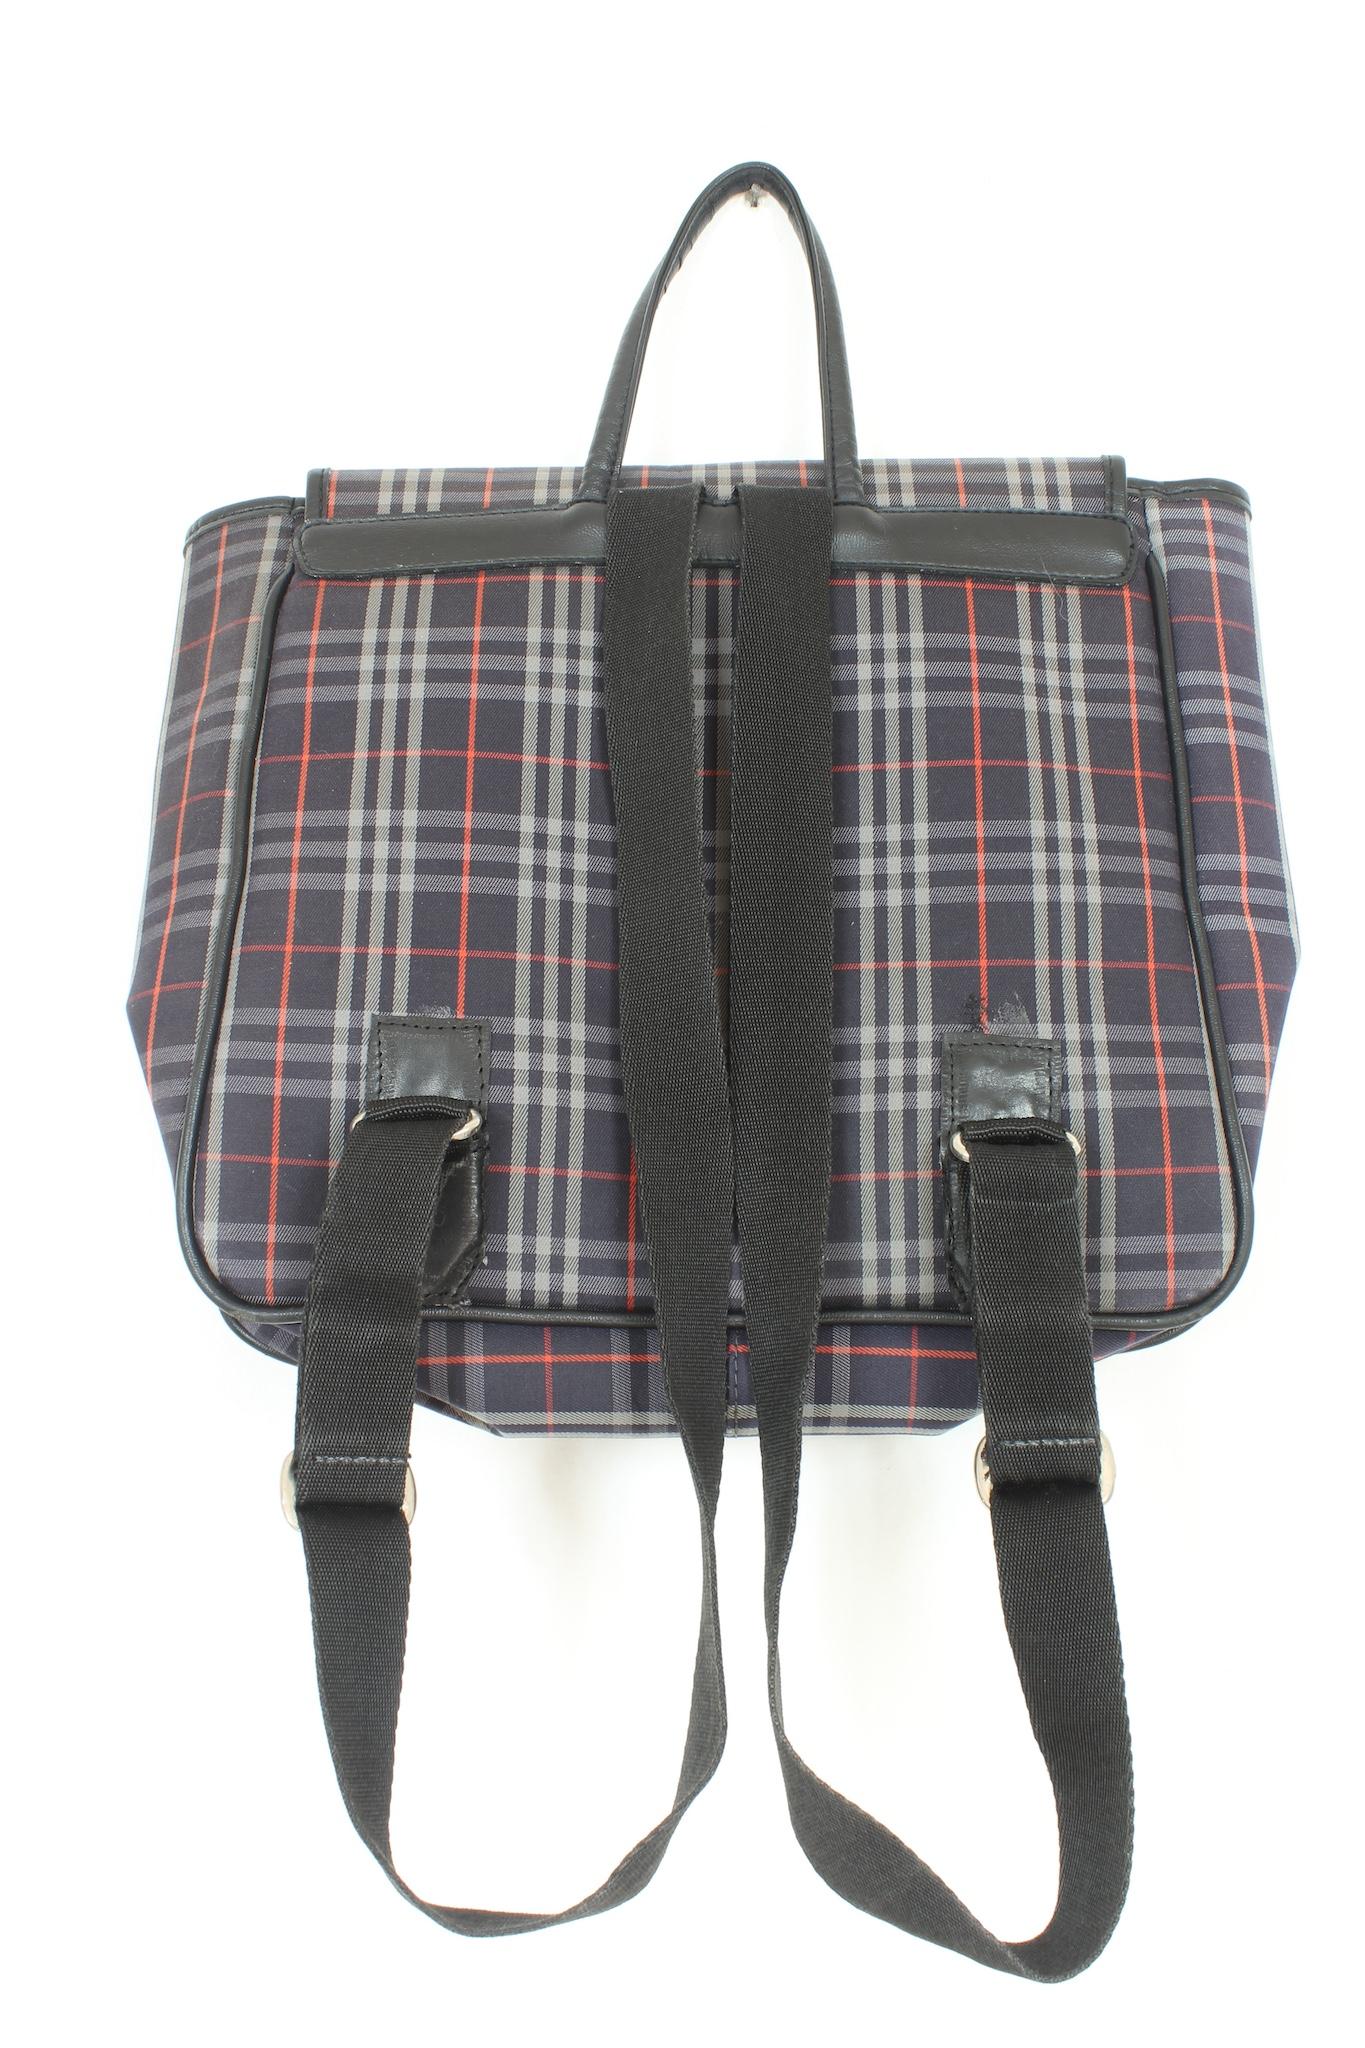 Burberry blue backpack vintage 1980s. This backpack is made of canvas and leather, the blue tartan theme is very characteristic. The straps are adjustable, the top handle is made of sturdy leather. Only a small flaw on the back should be noted, the